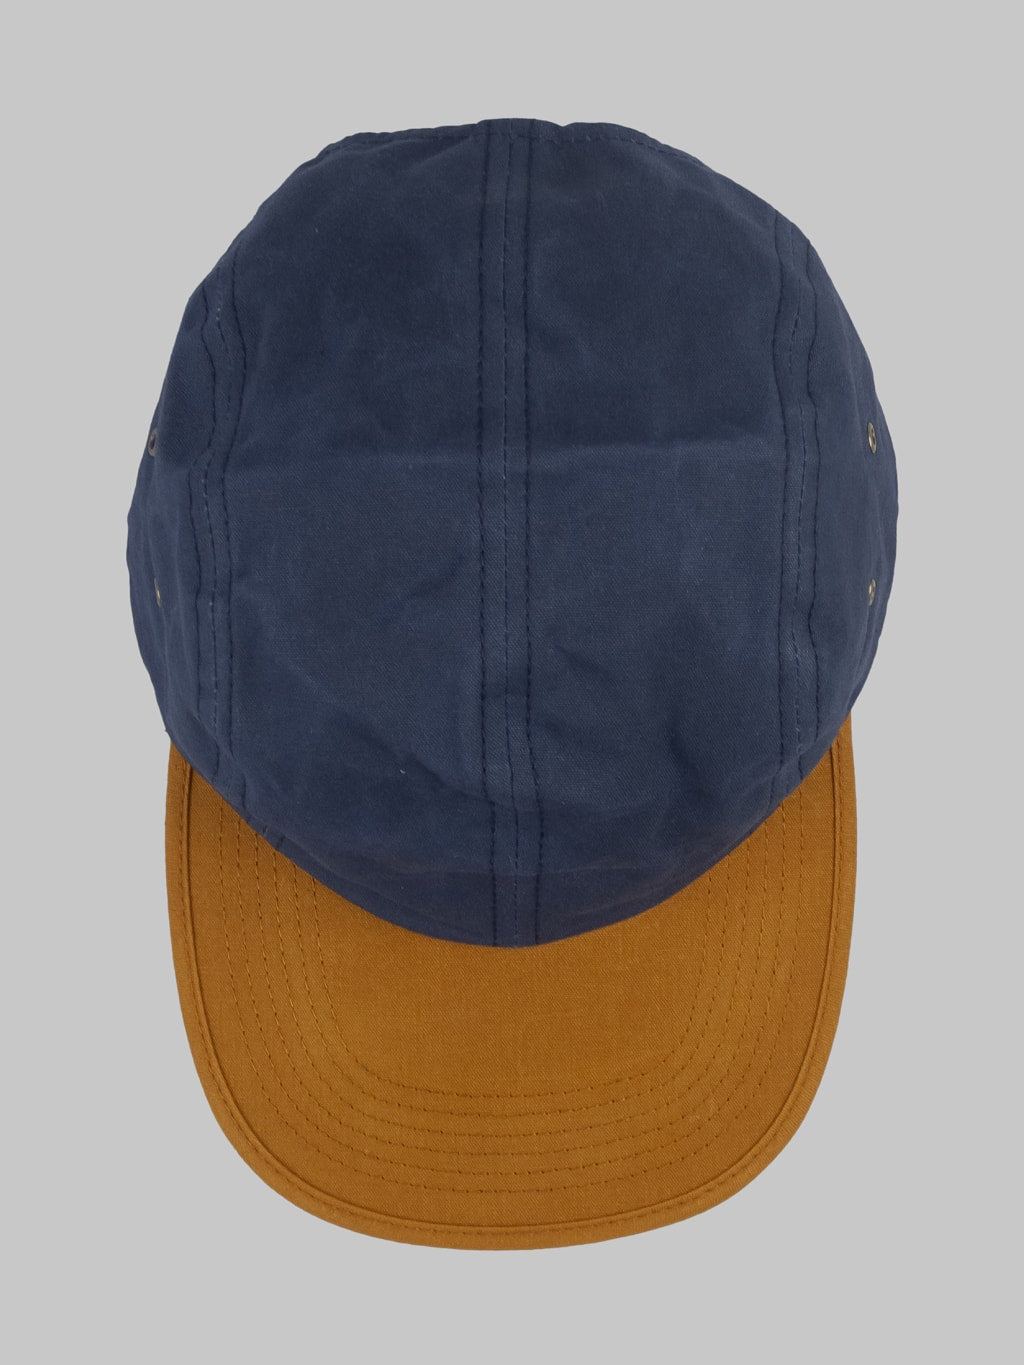 Mighty Shine Paraffin OX 4Panel Cap navy four panel crown